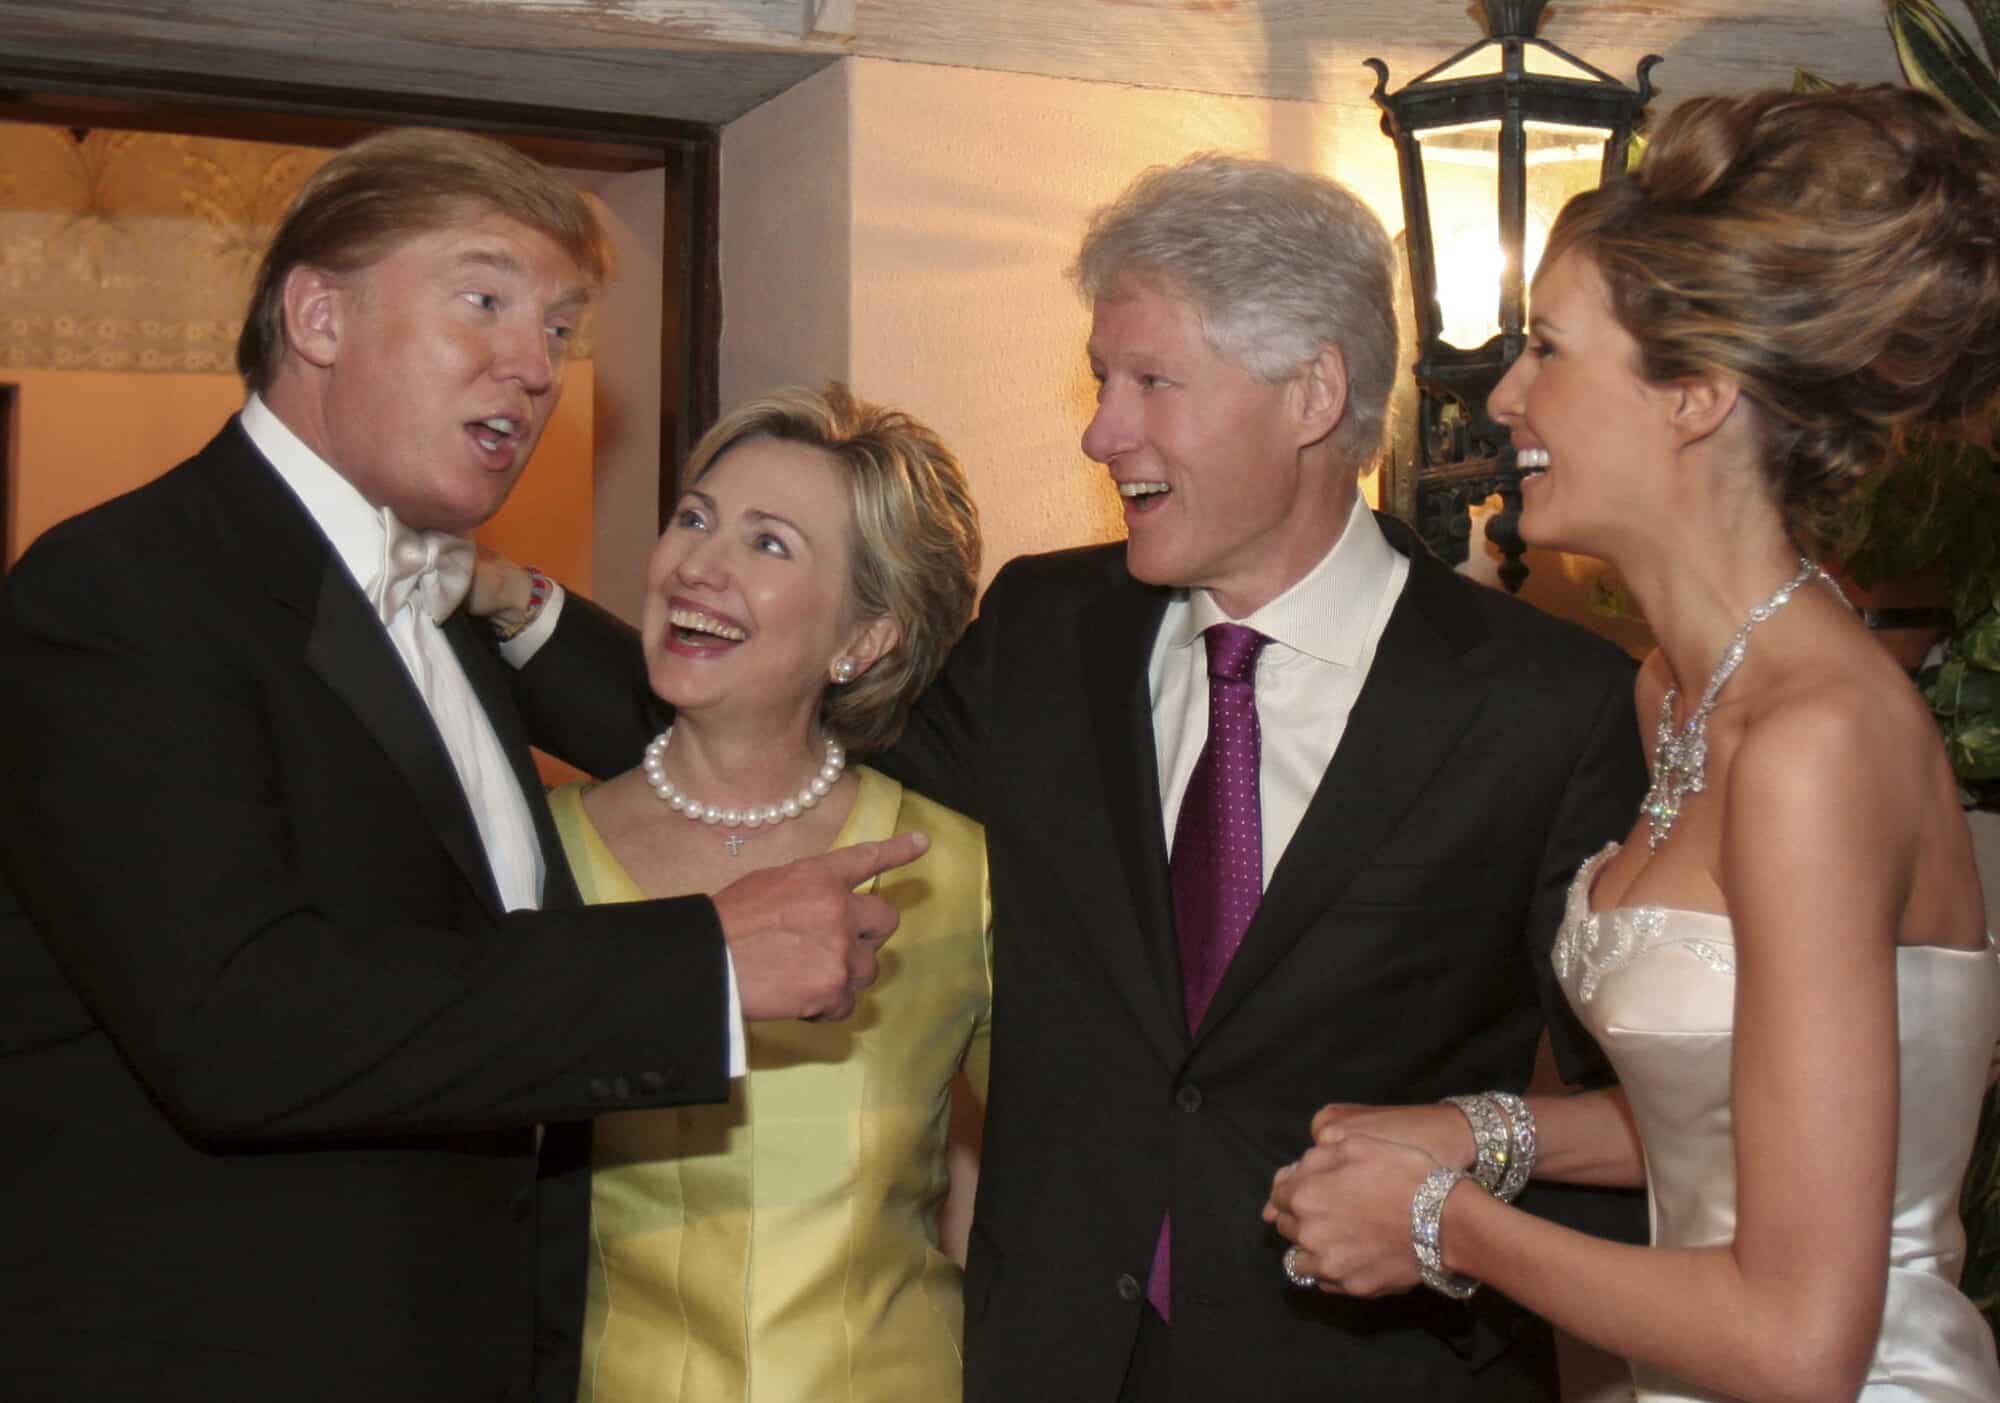 Donald and Melania Trump socialize with Hilary and Bill Clinton.